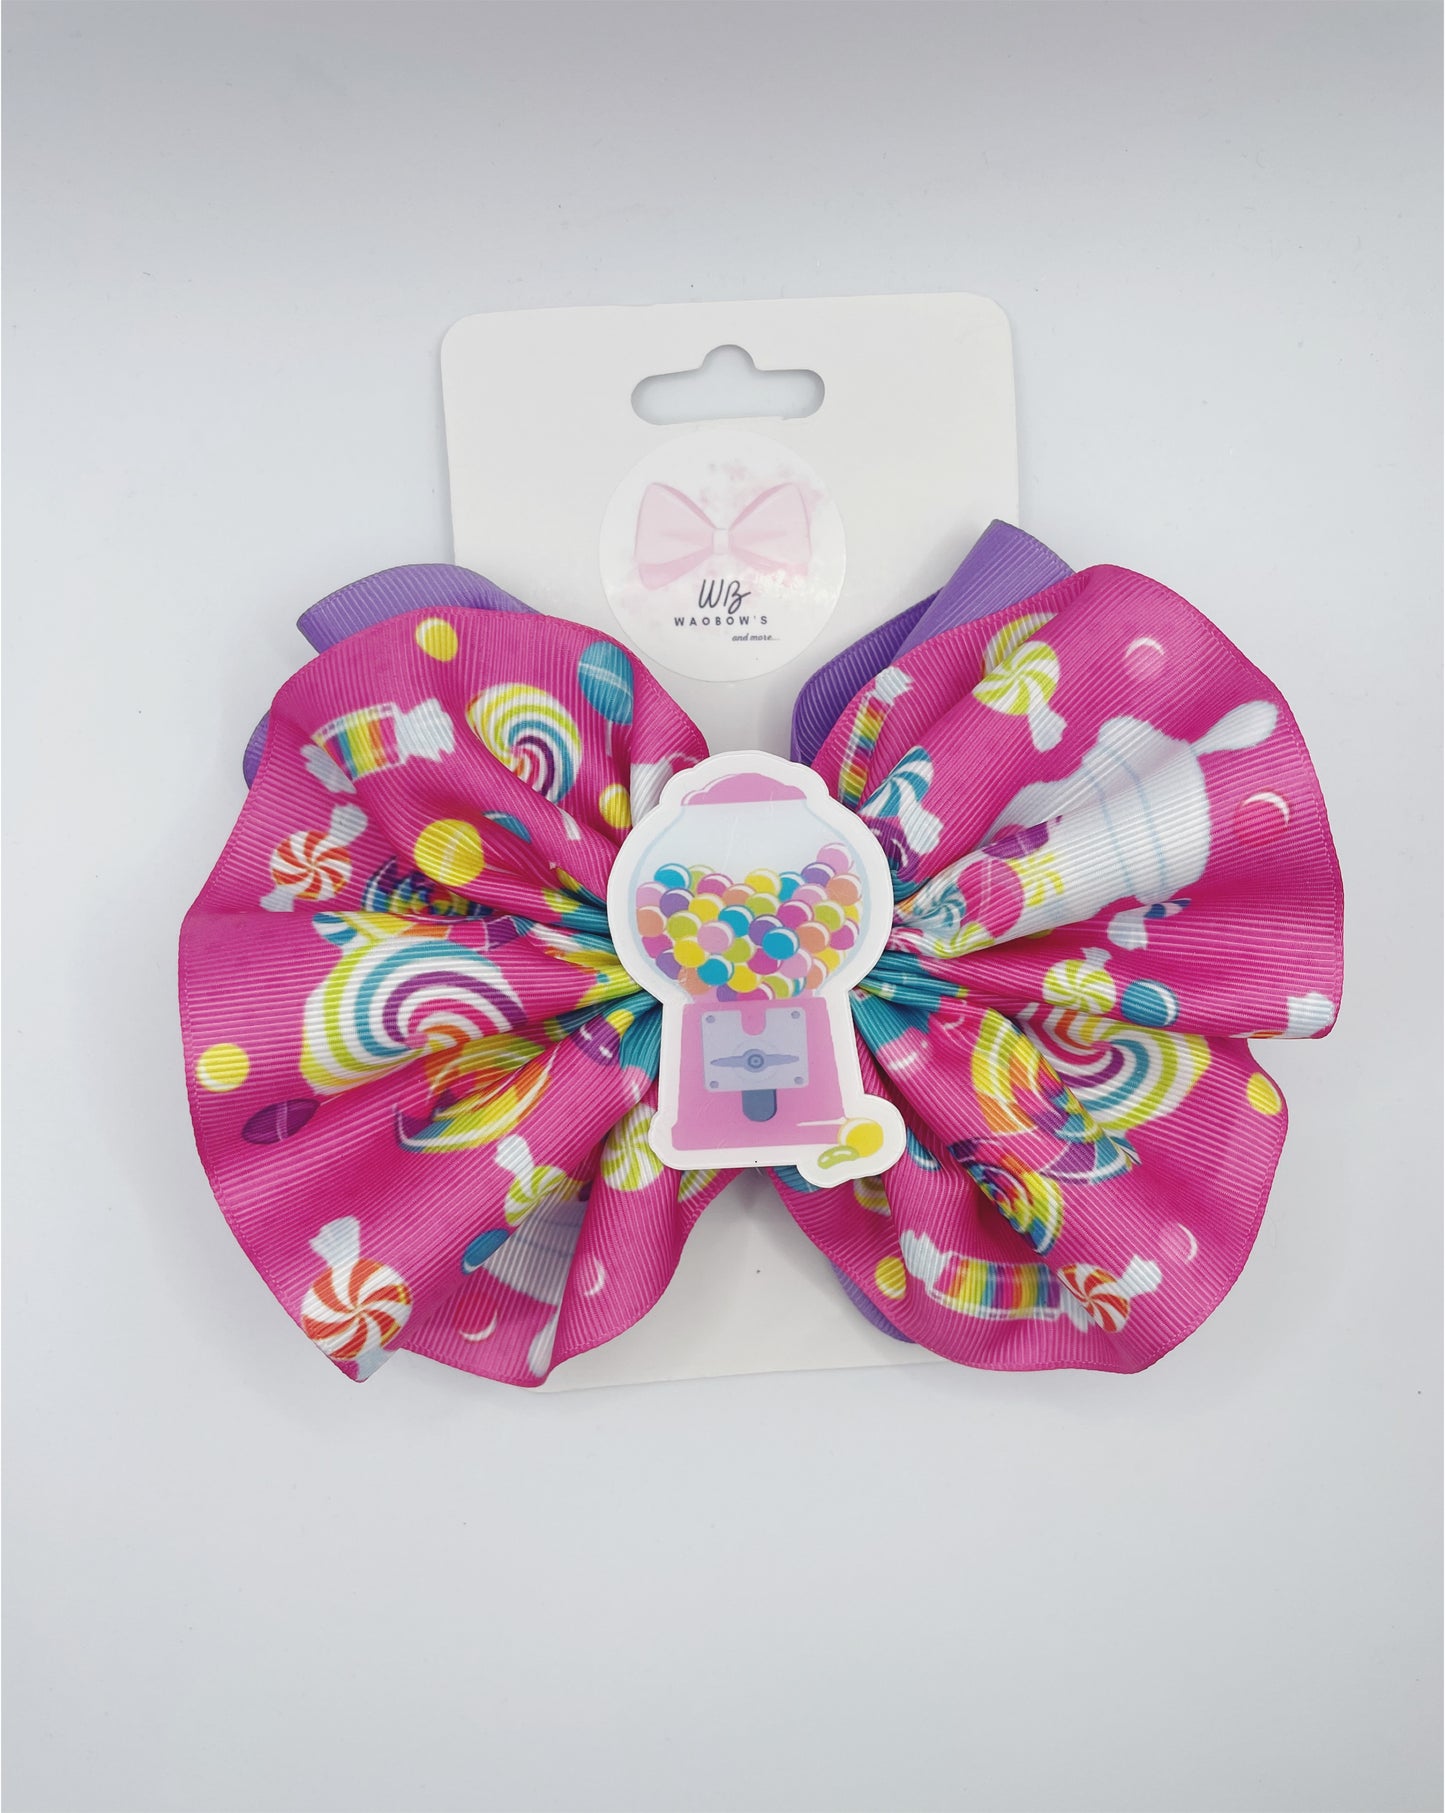 Candy Hair Bow On Alligator Clip  Sweet Temptation Hair Bow 6” Hair Bow Clip  Big Ribbons Hair Bow